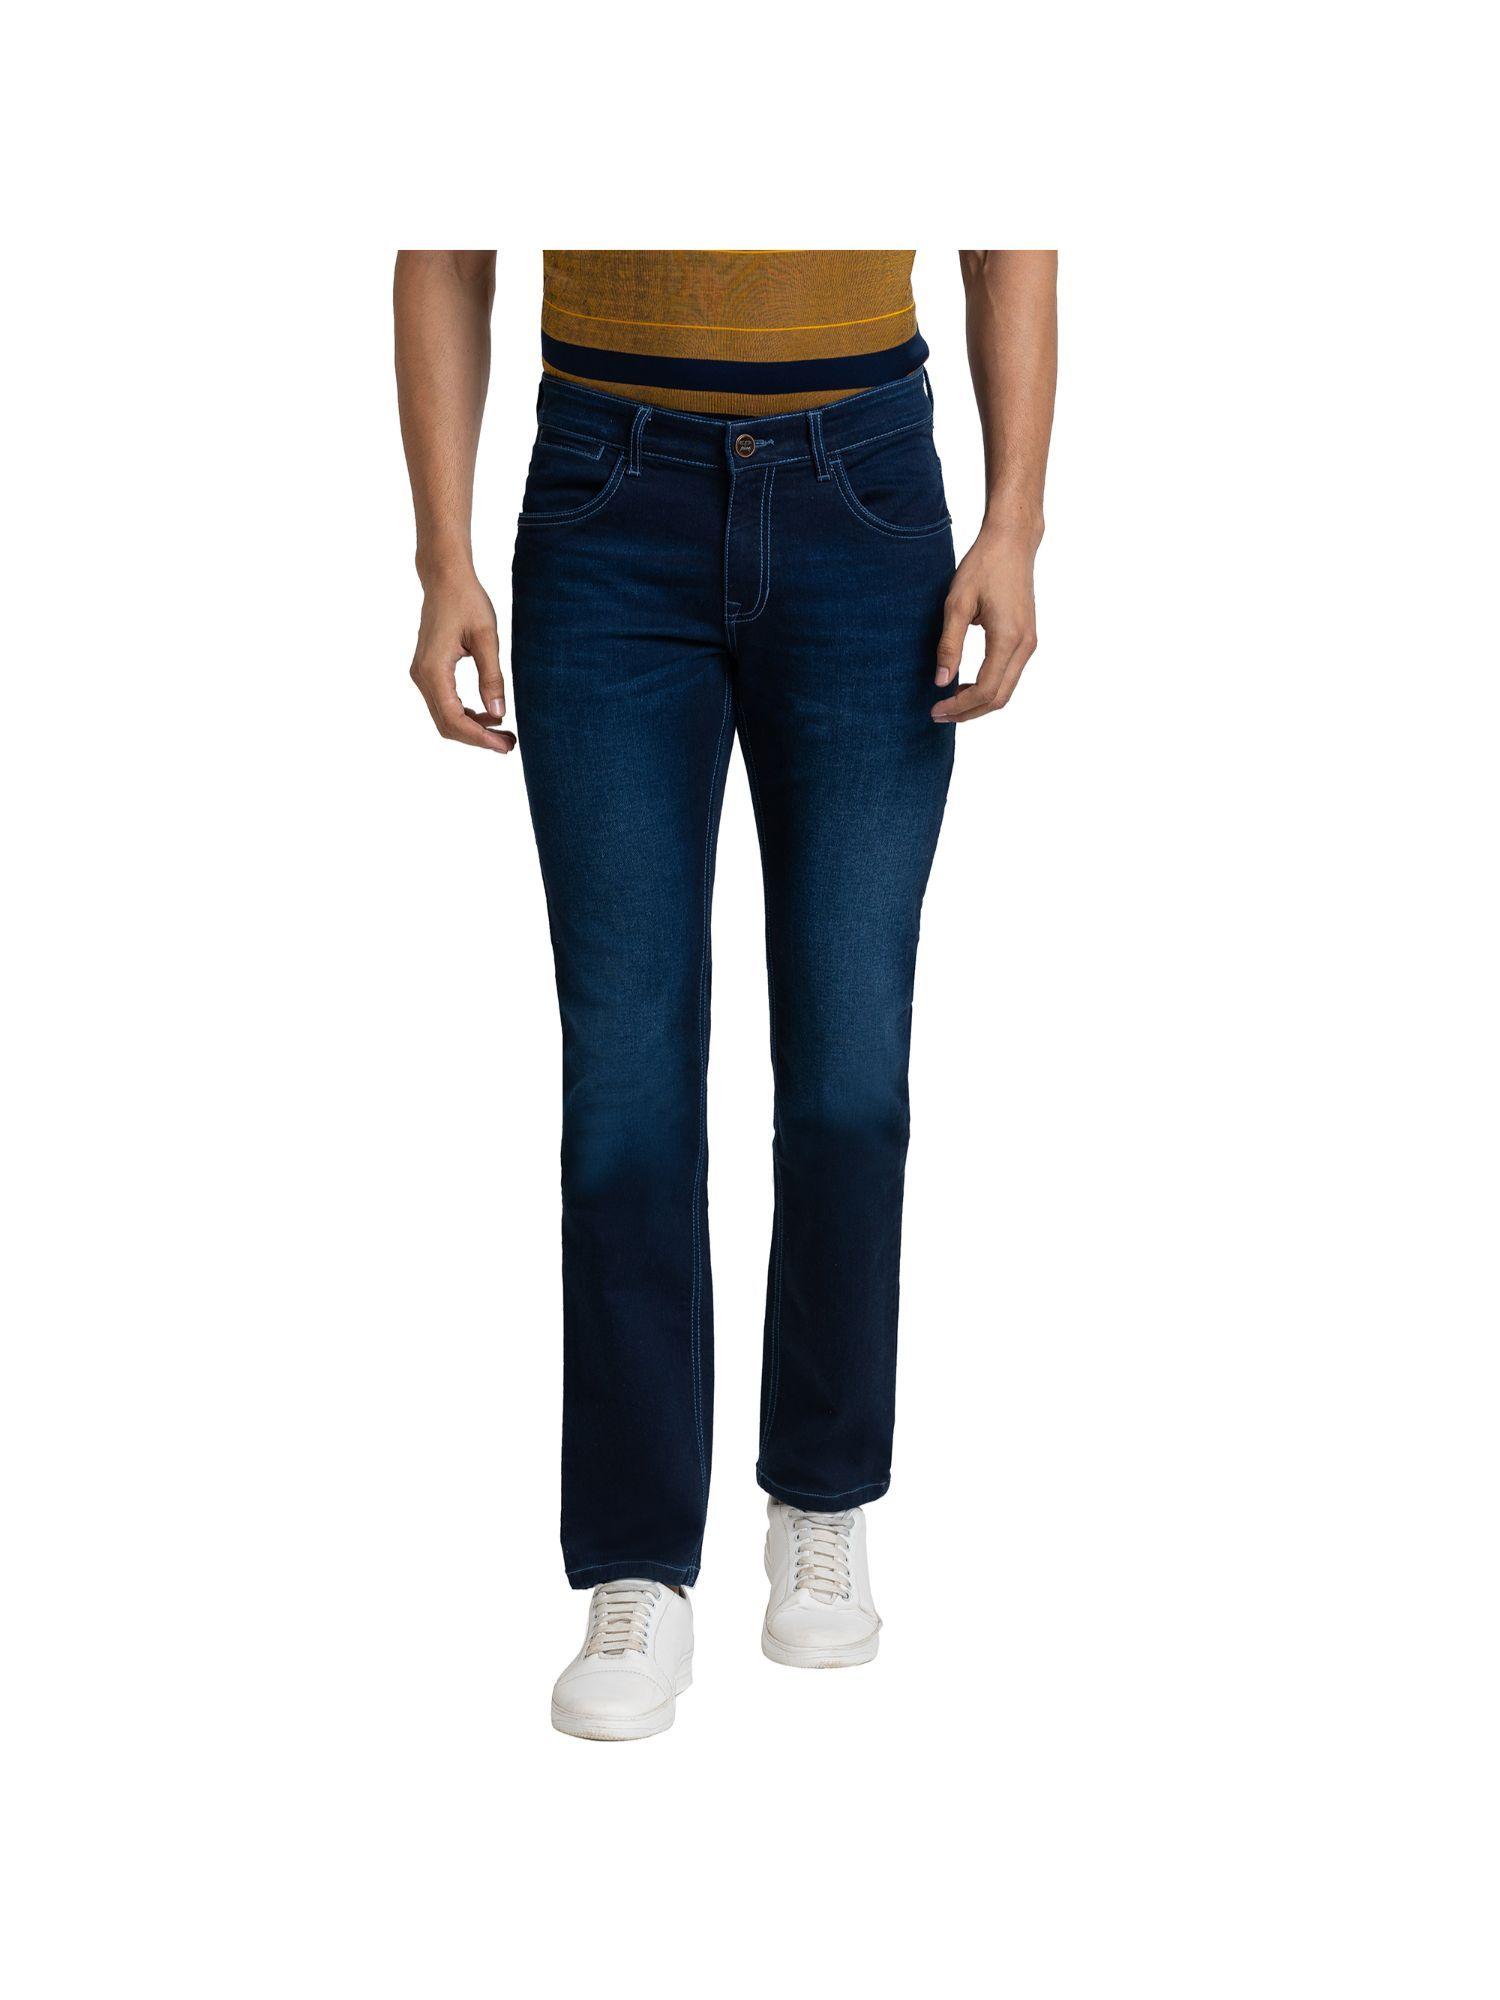 tapered fit solid dark blue jeans